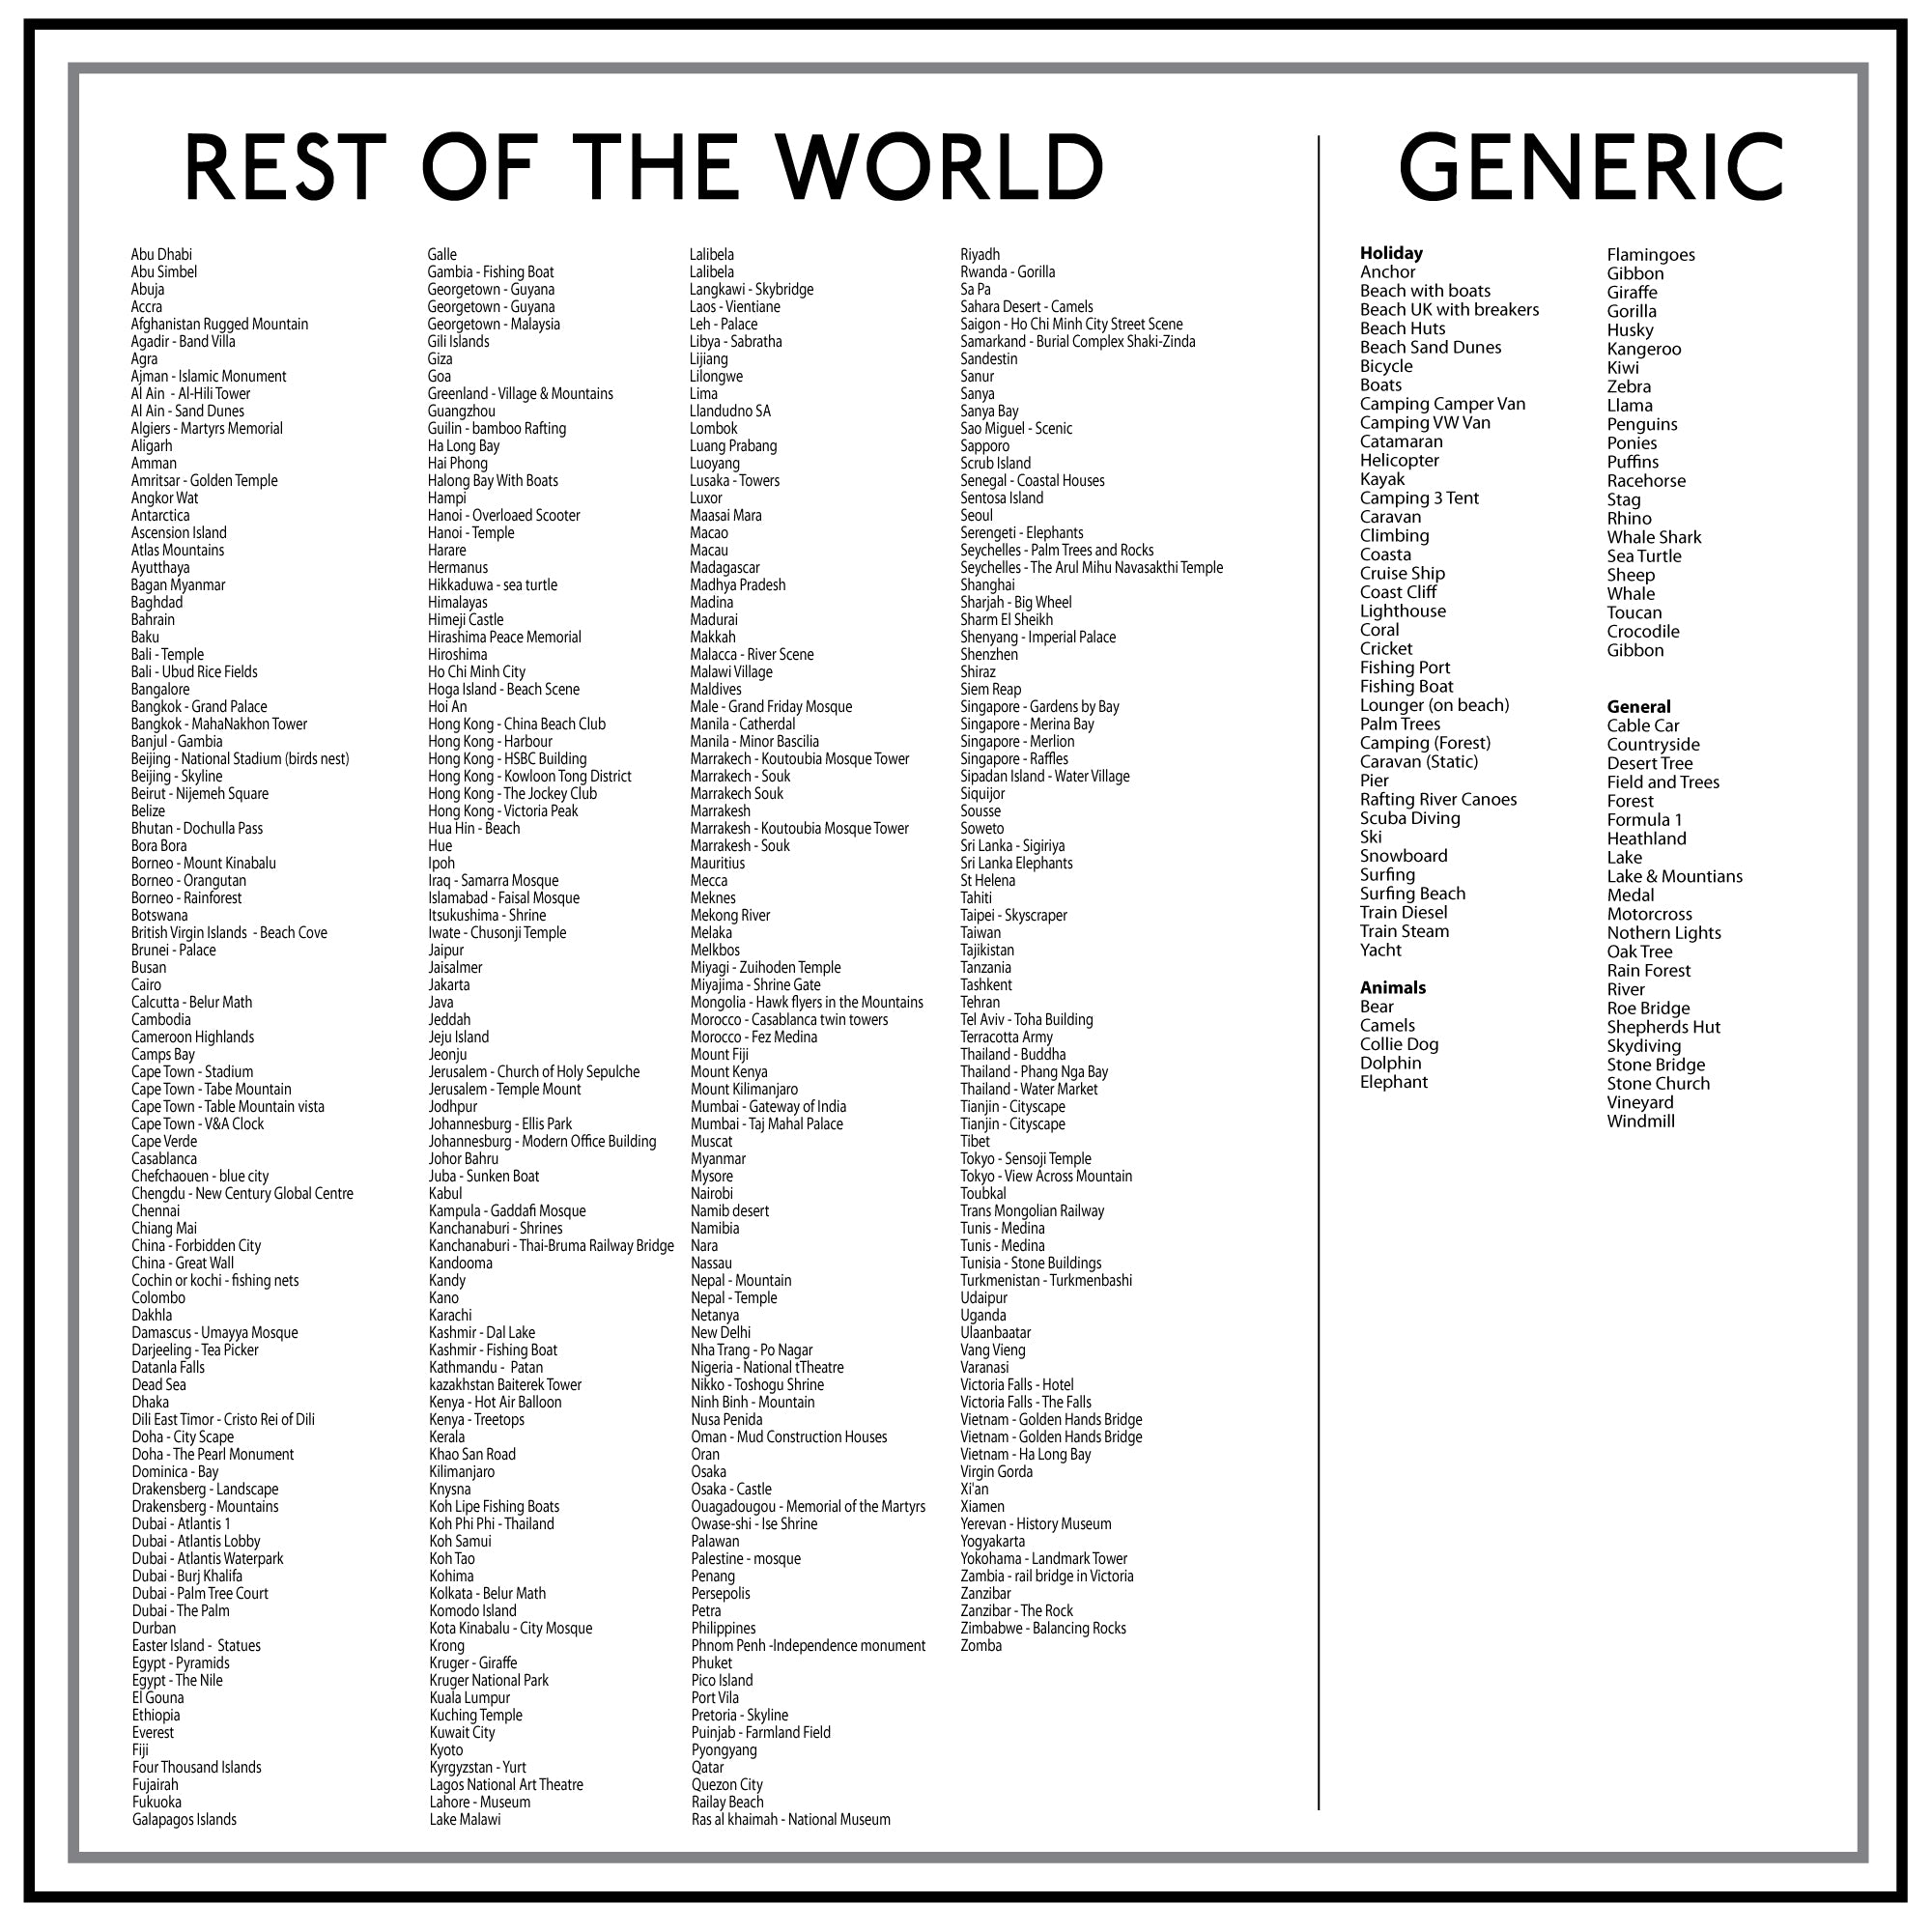 Image showing list of Rest of the World and Generic Destinations